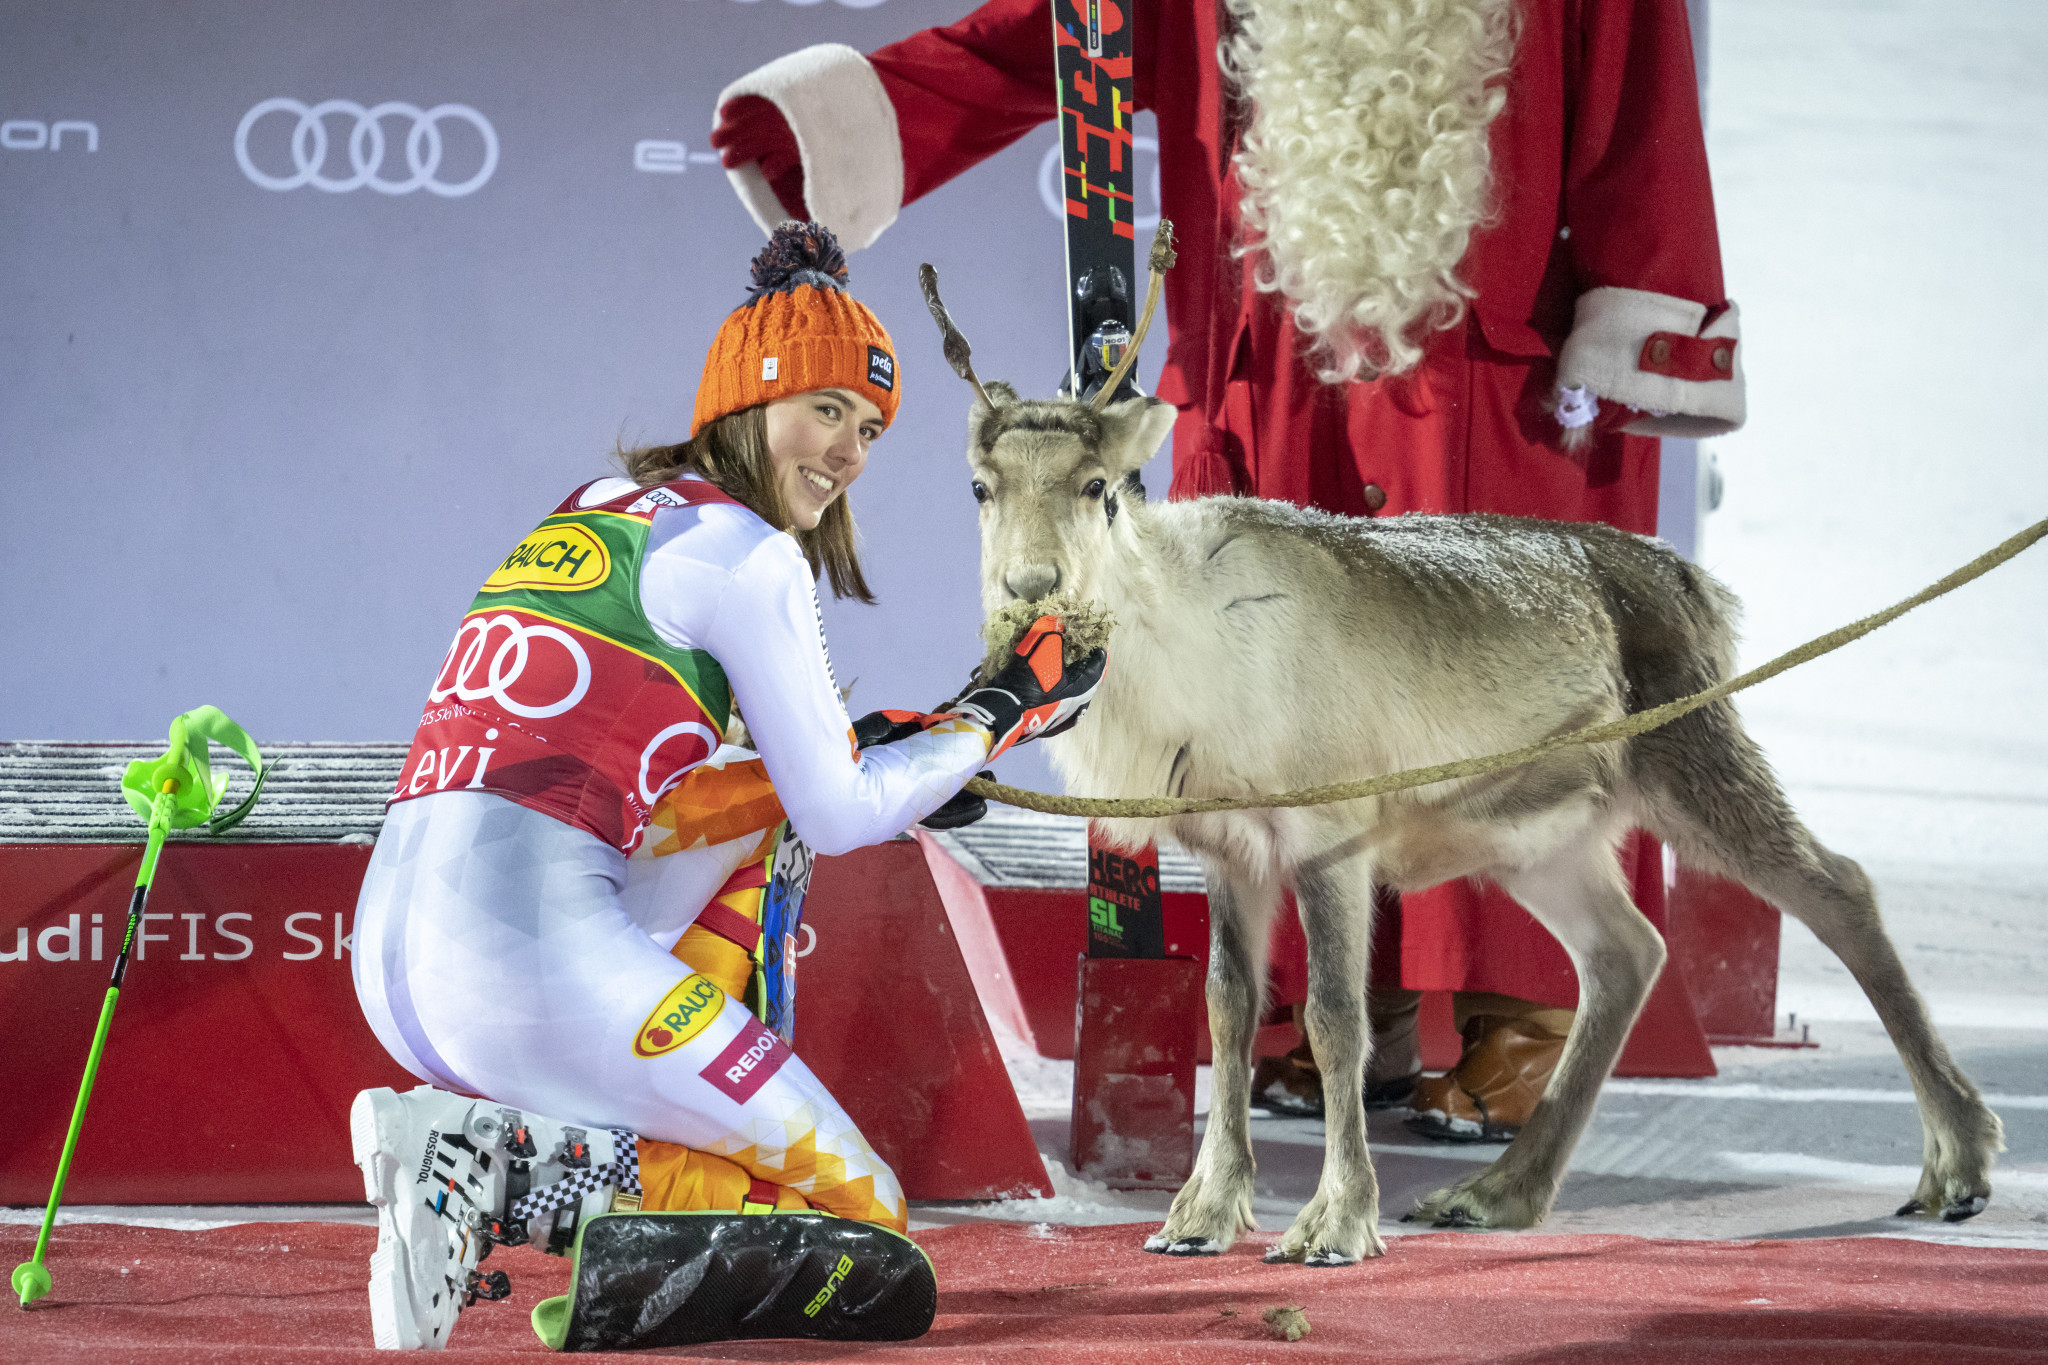 Petra Vlhová vowed to name the reindeer after her boyfriend ©Getty Images